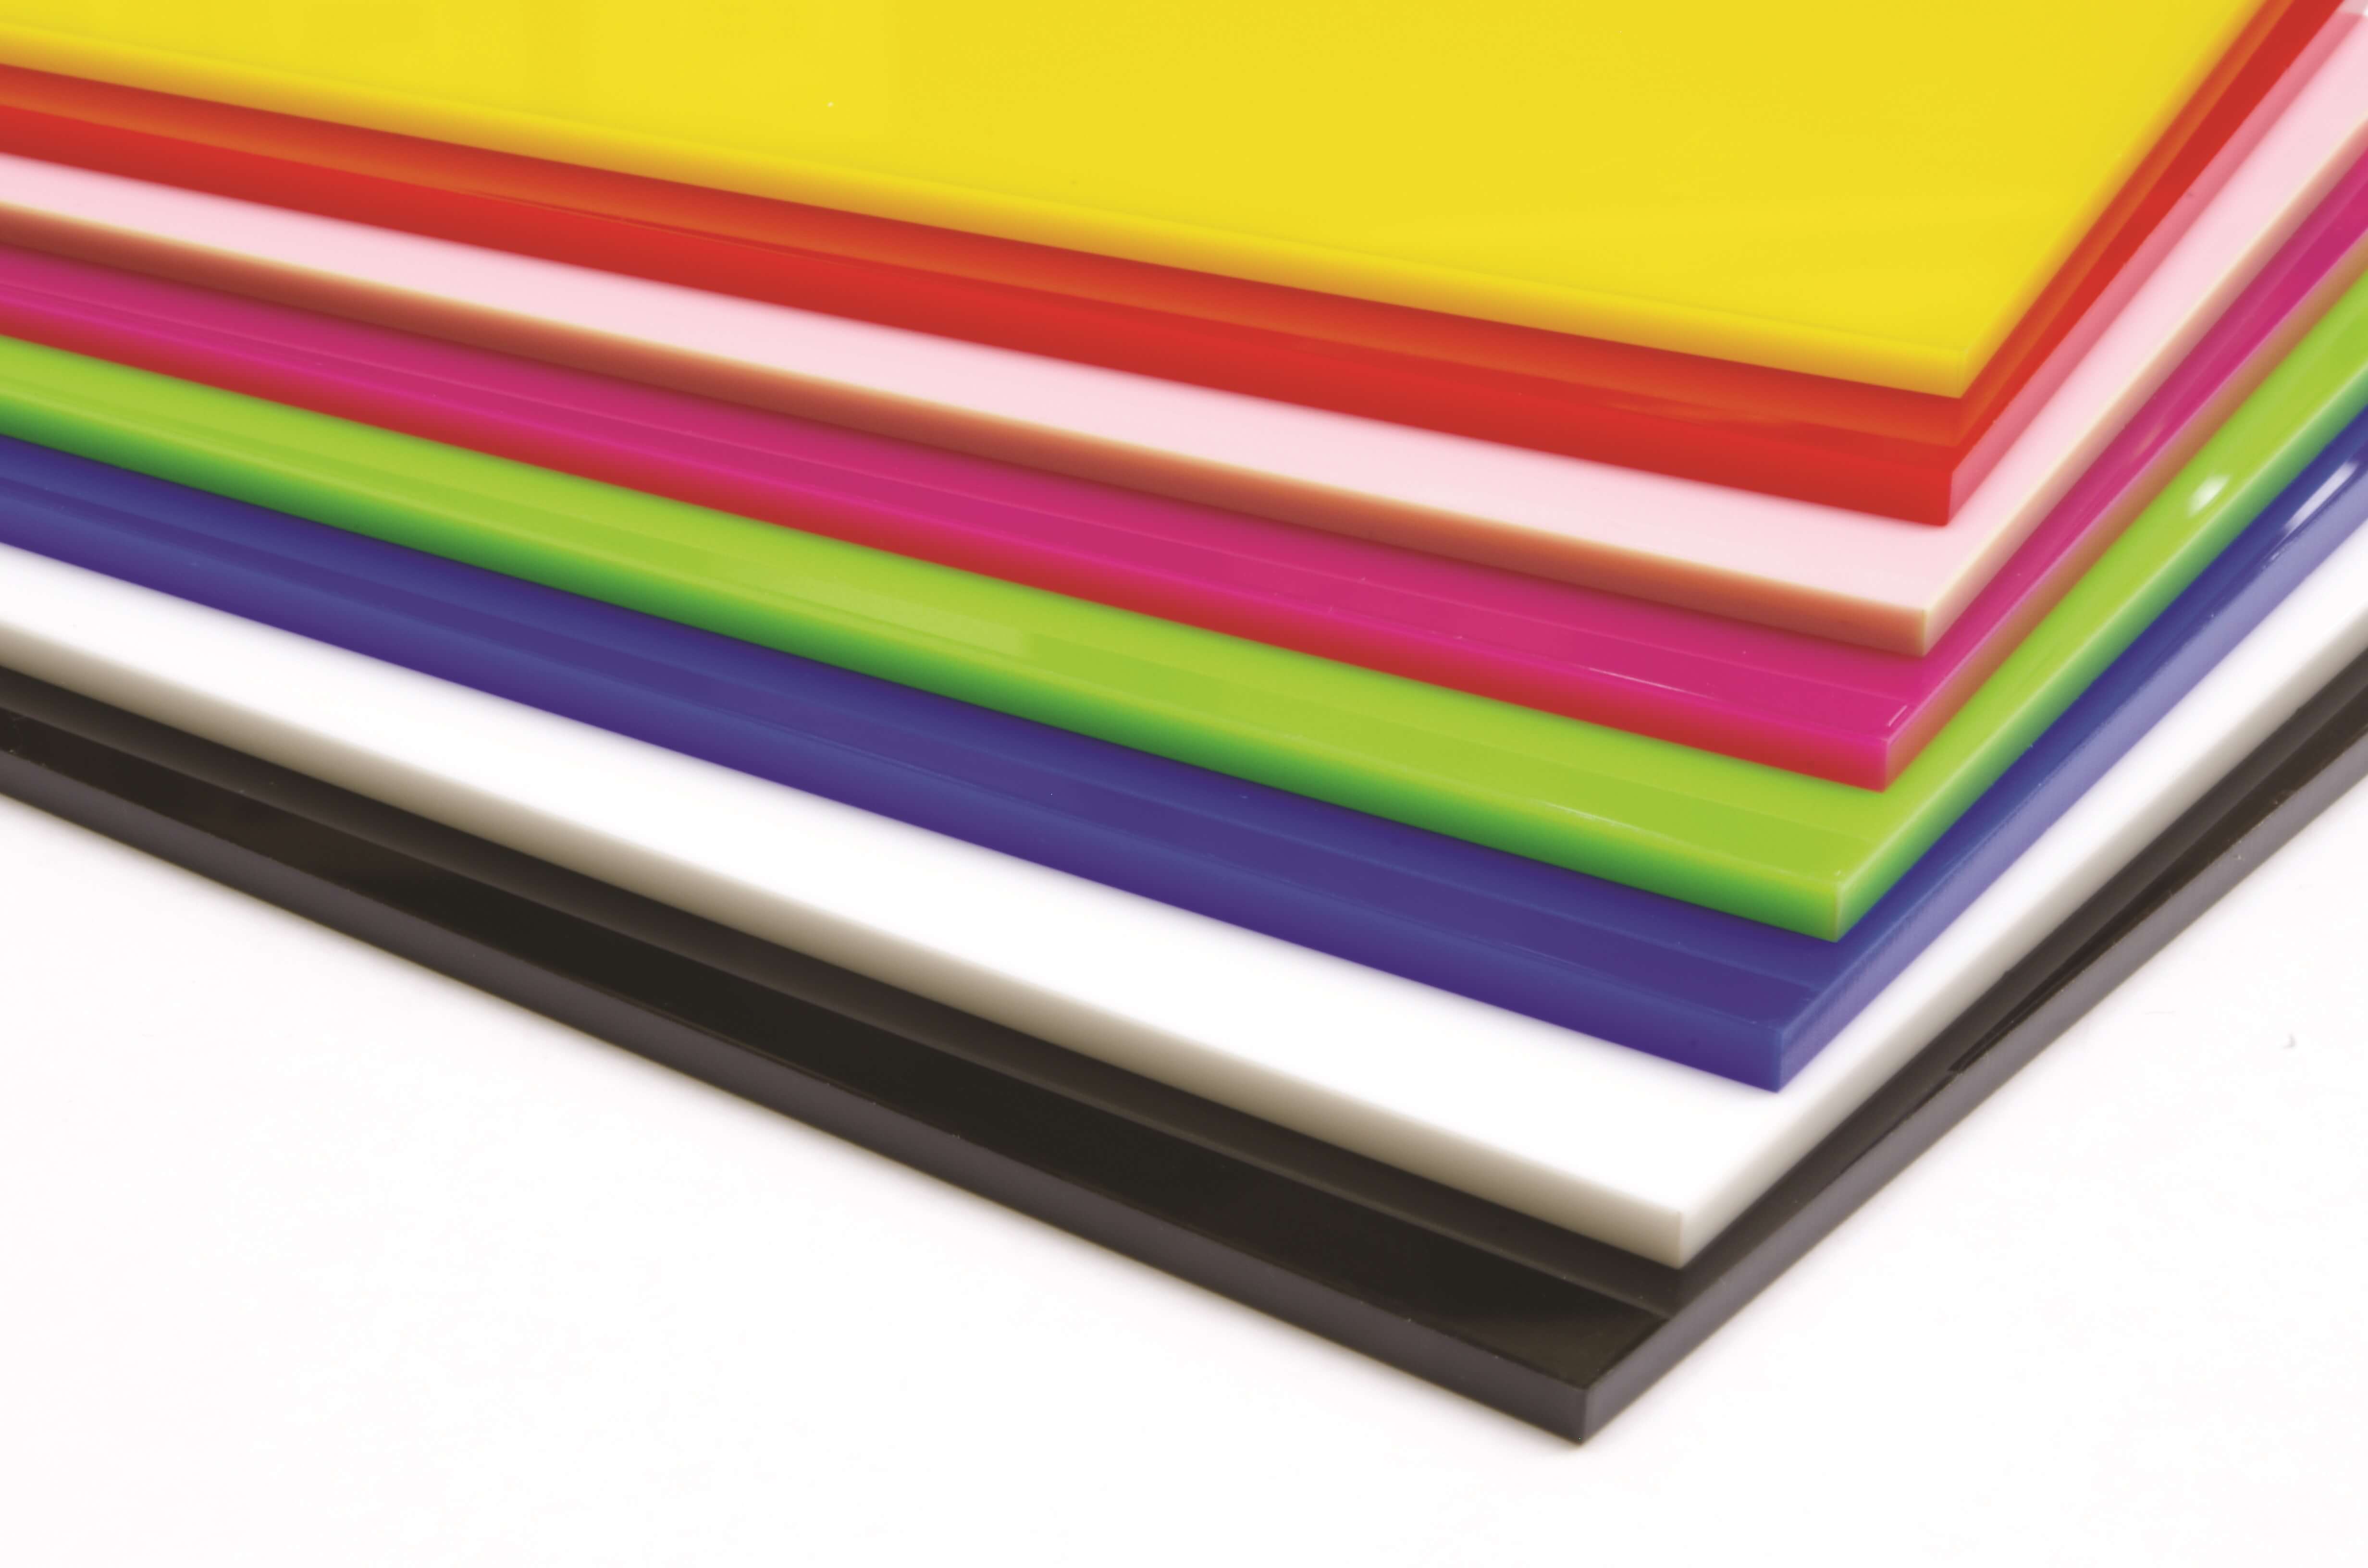 Cast Acrylic 5mm Sheet - 1000 x 500mm Assorted Pack of 8